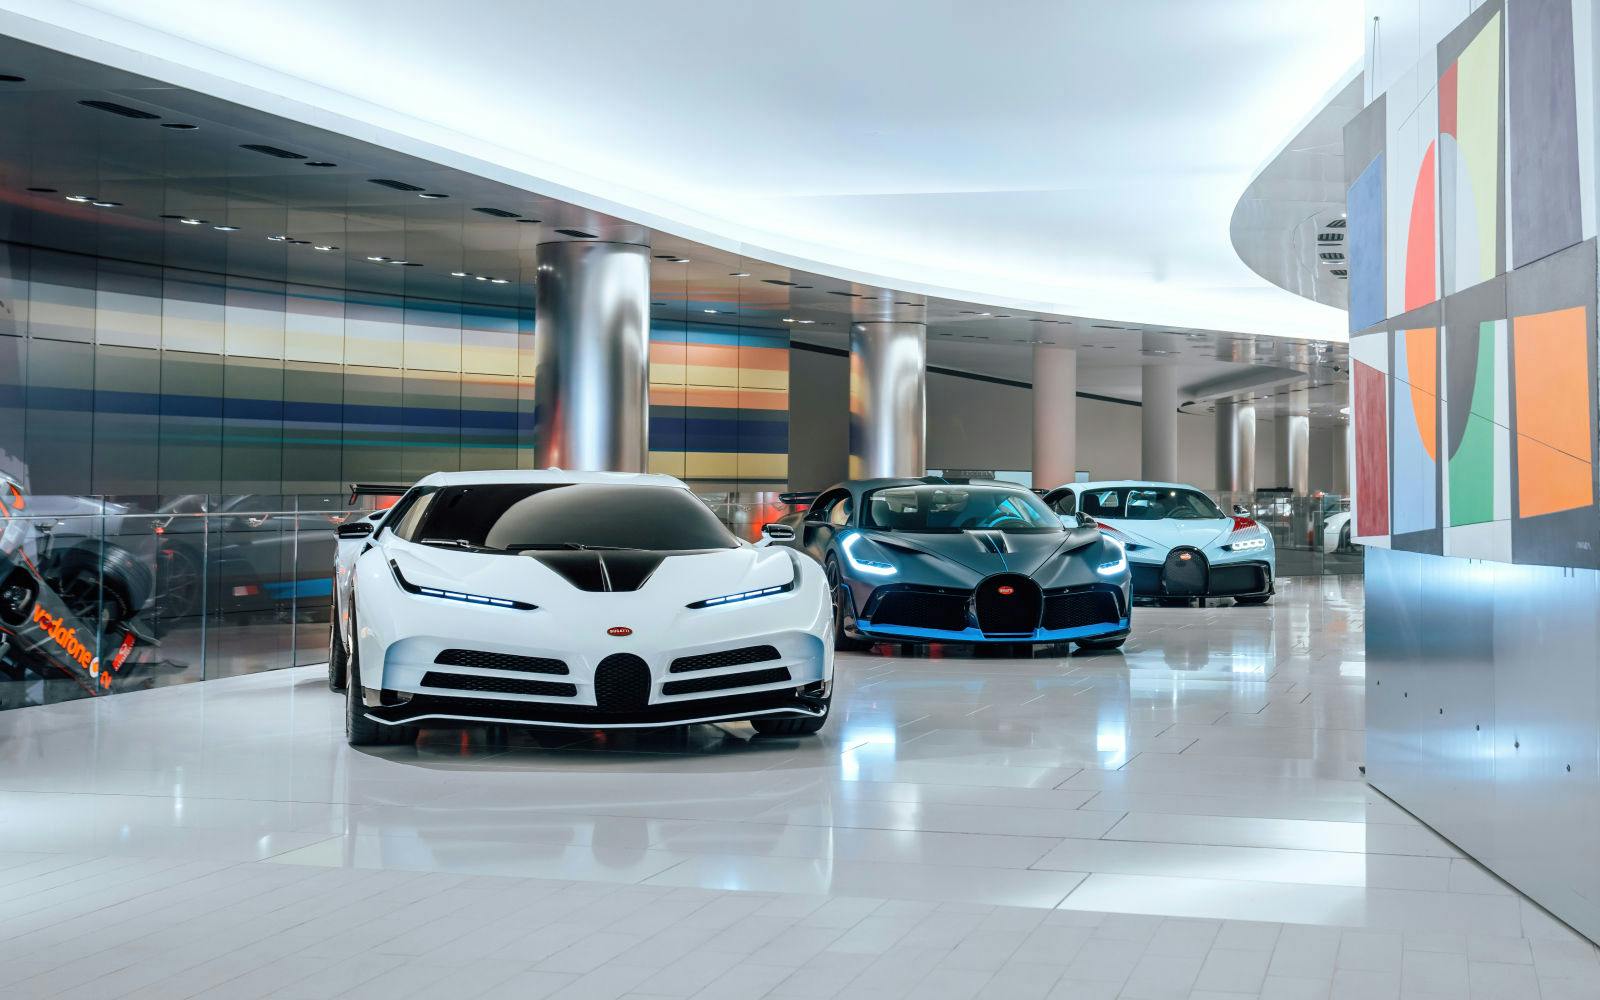 The Car Collection of H.S.H. the Prince of Monaco hosts an exhibition of Bugatti hyper sports cars among the most exclusive until April 28.